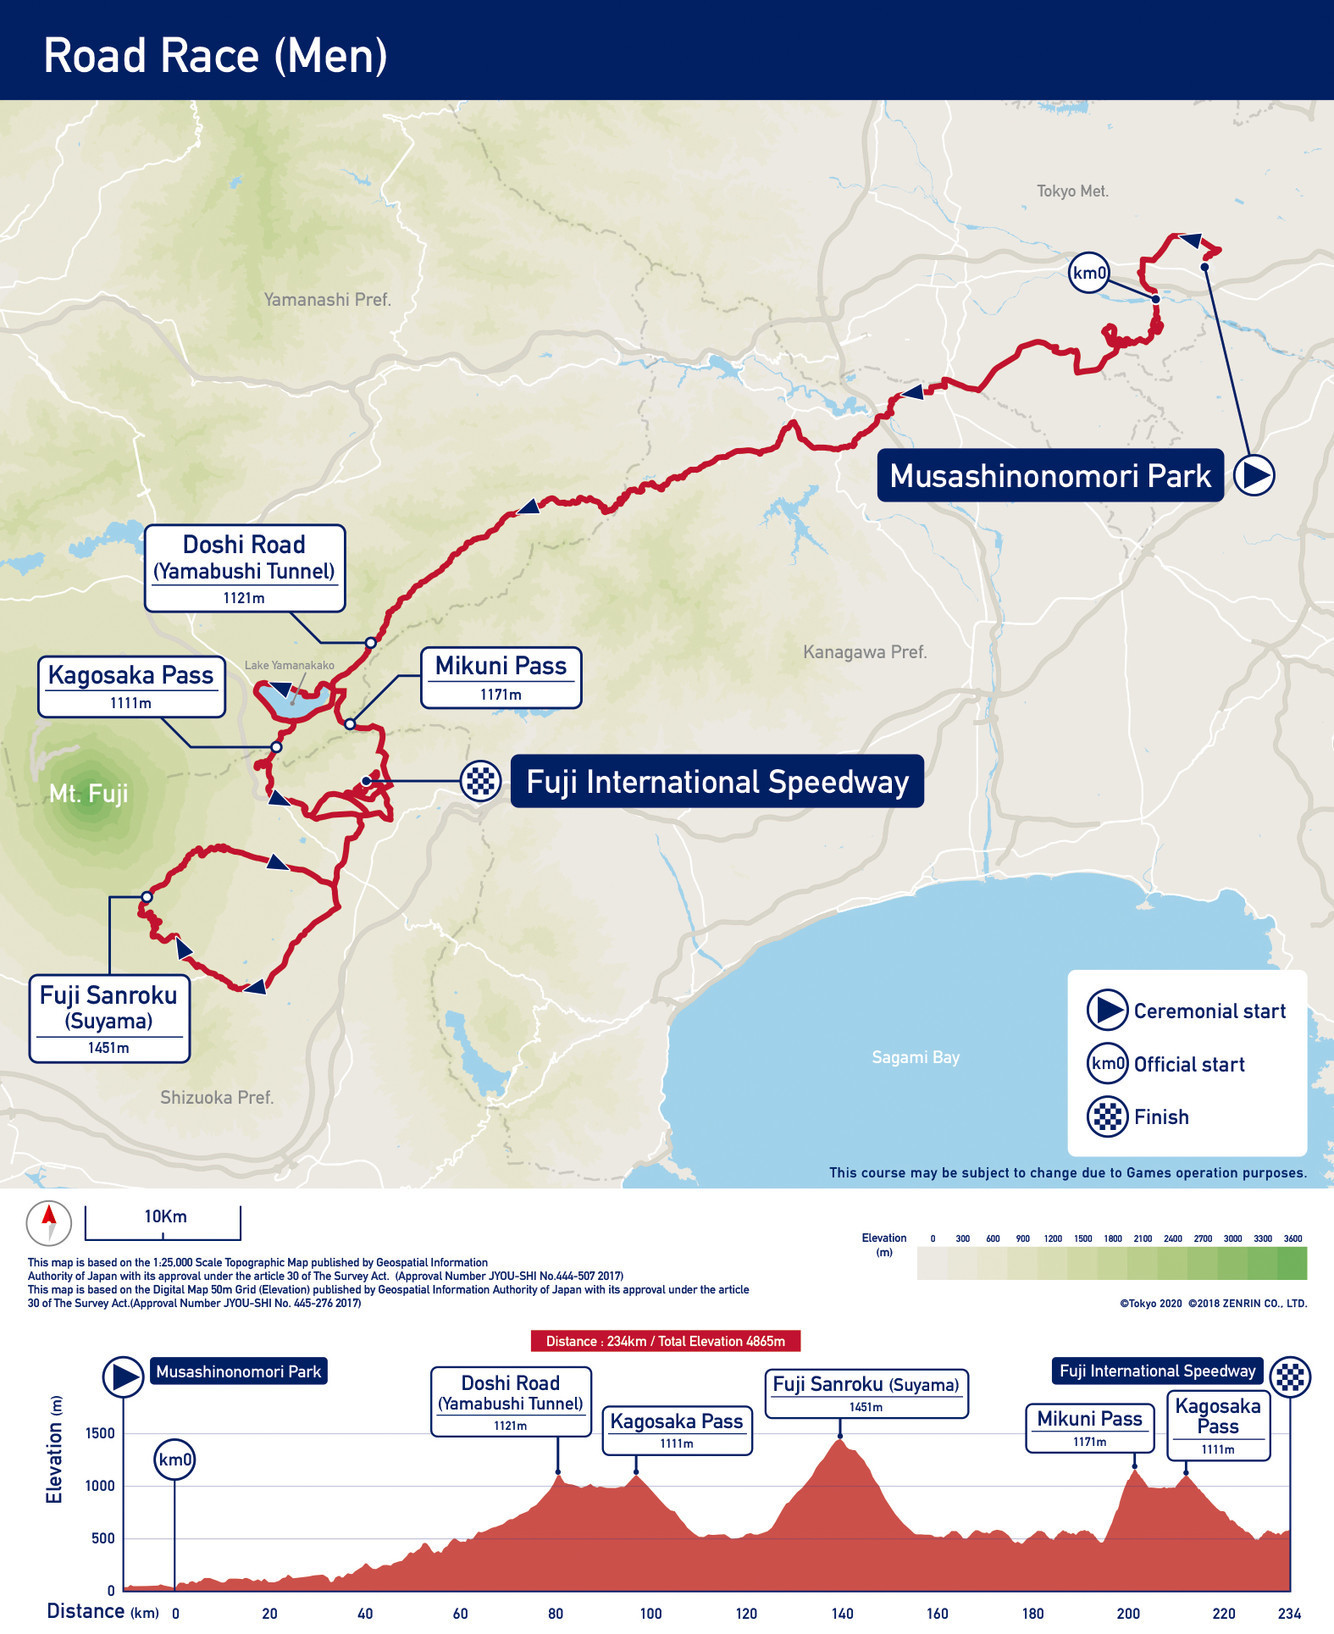 The men's road race course unveiled by Tokyo 2020 ©Tokyo 2020